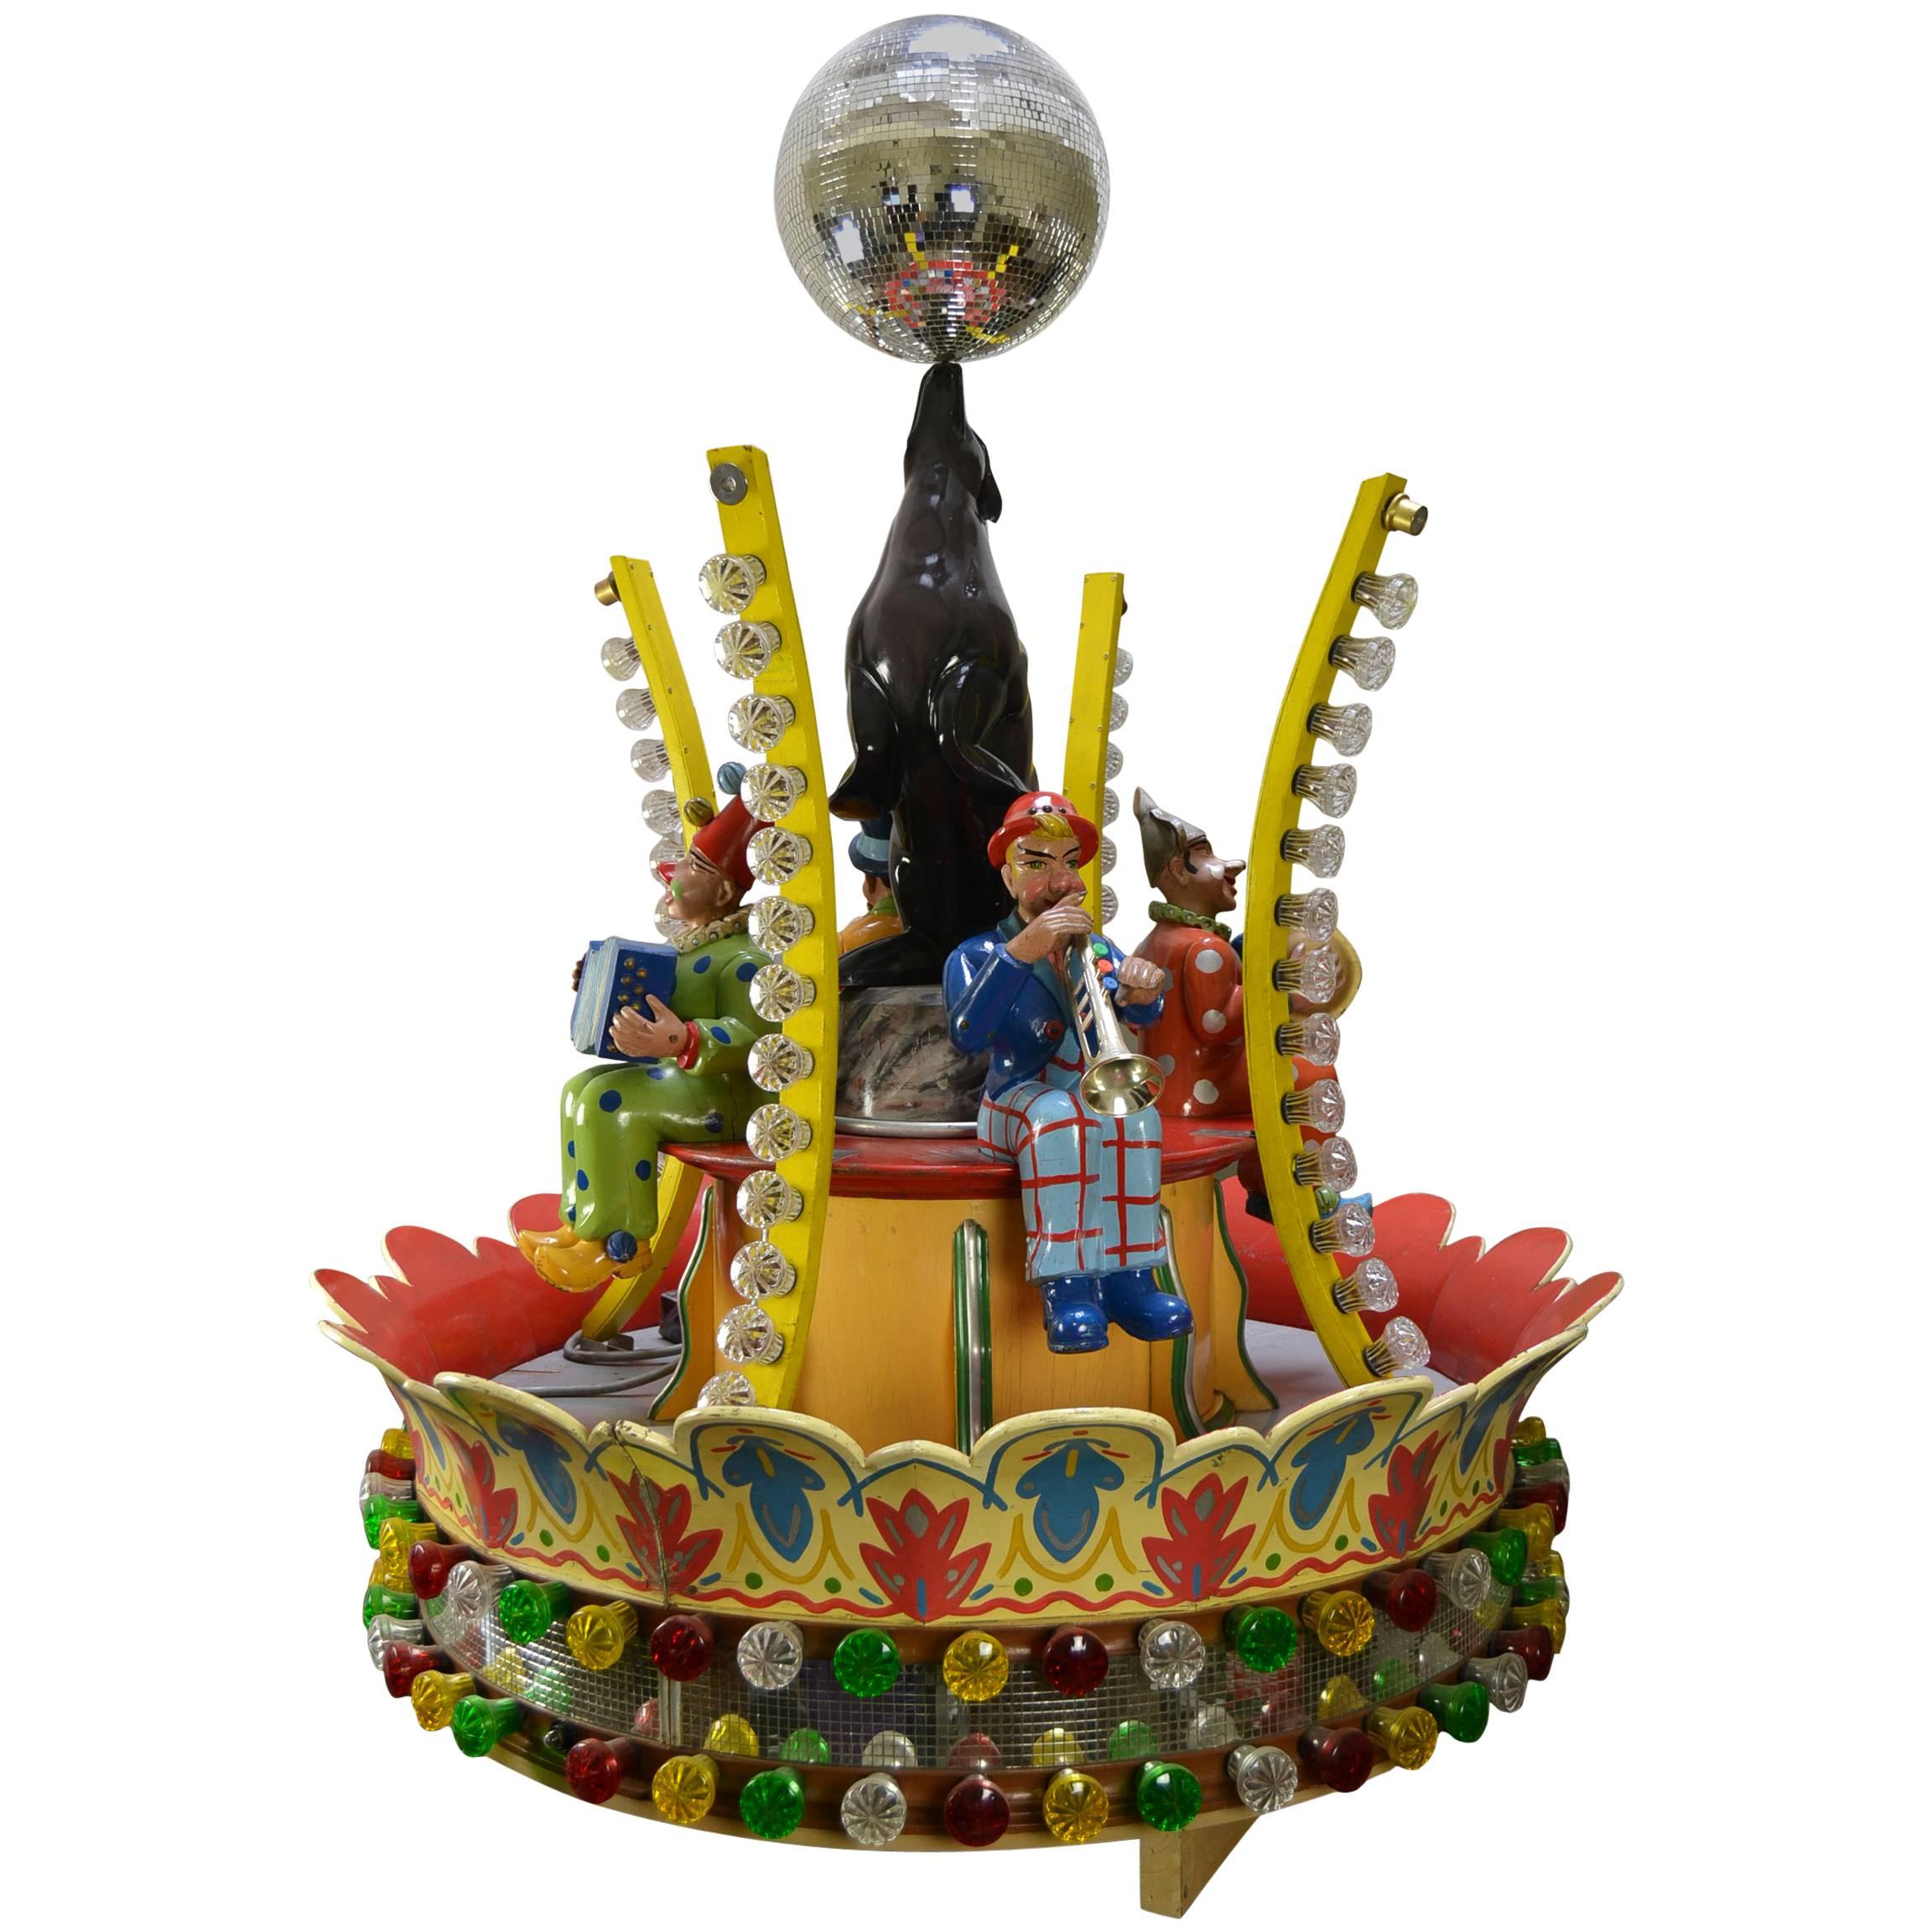 Wooden Center Carousel Ride with Clowns, Seal and Disco Ball for Hennecke, 1950s